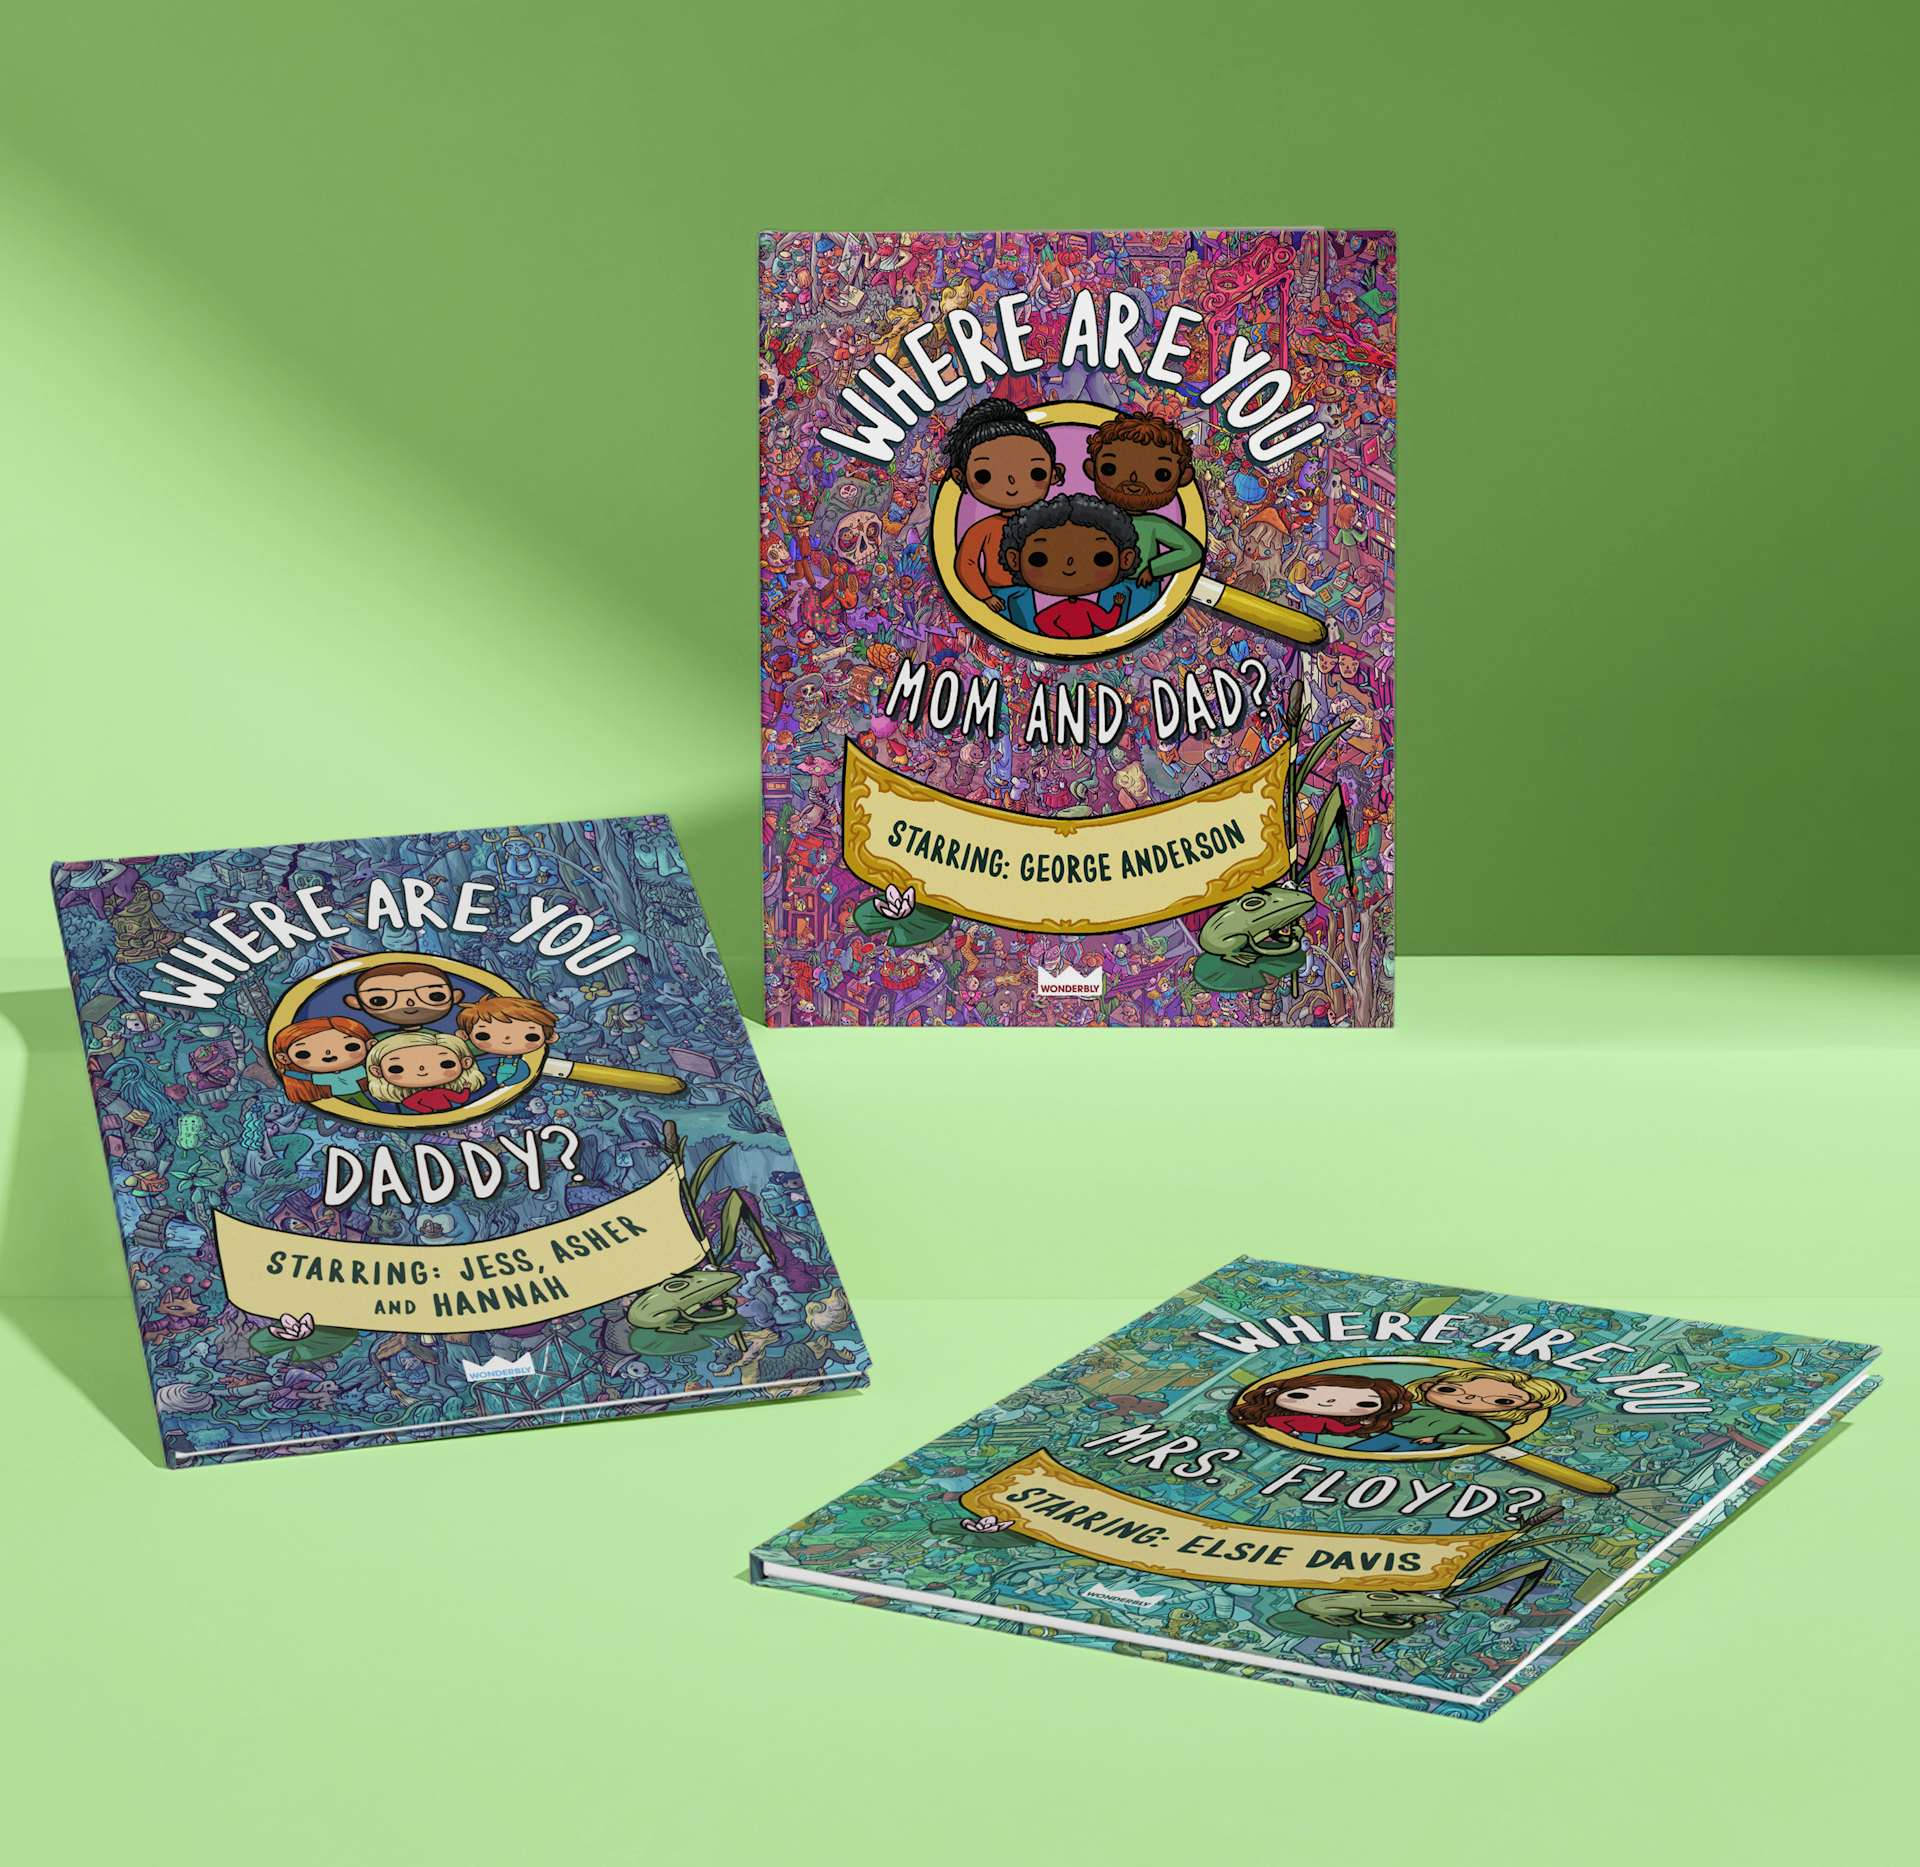 Three examples of the personalised book